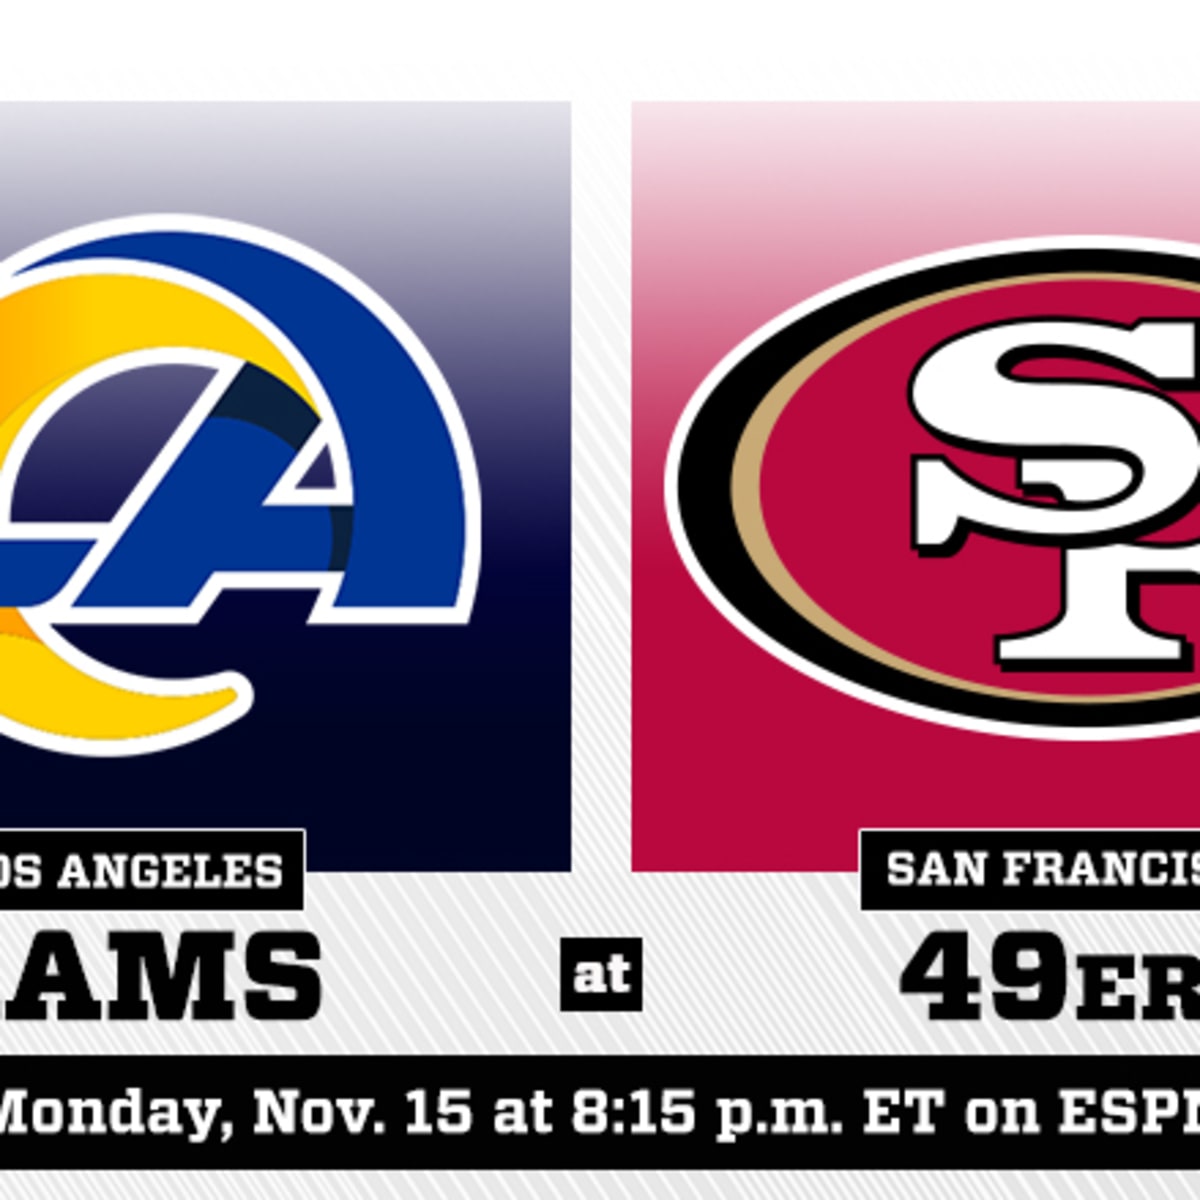 rams v 49ers tickets